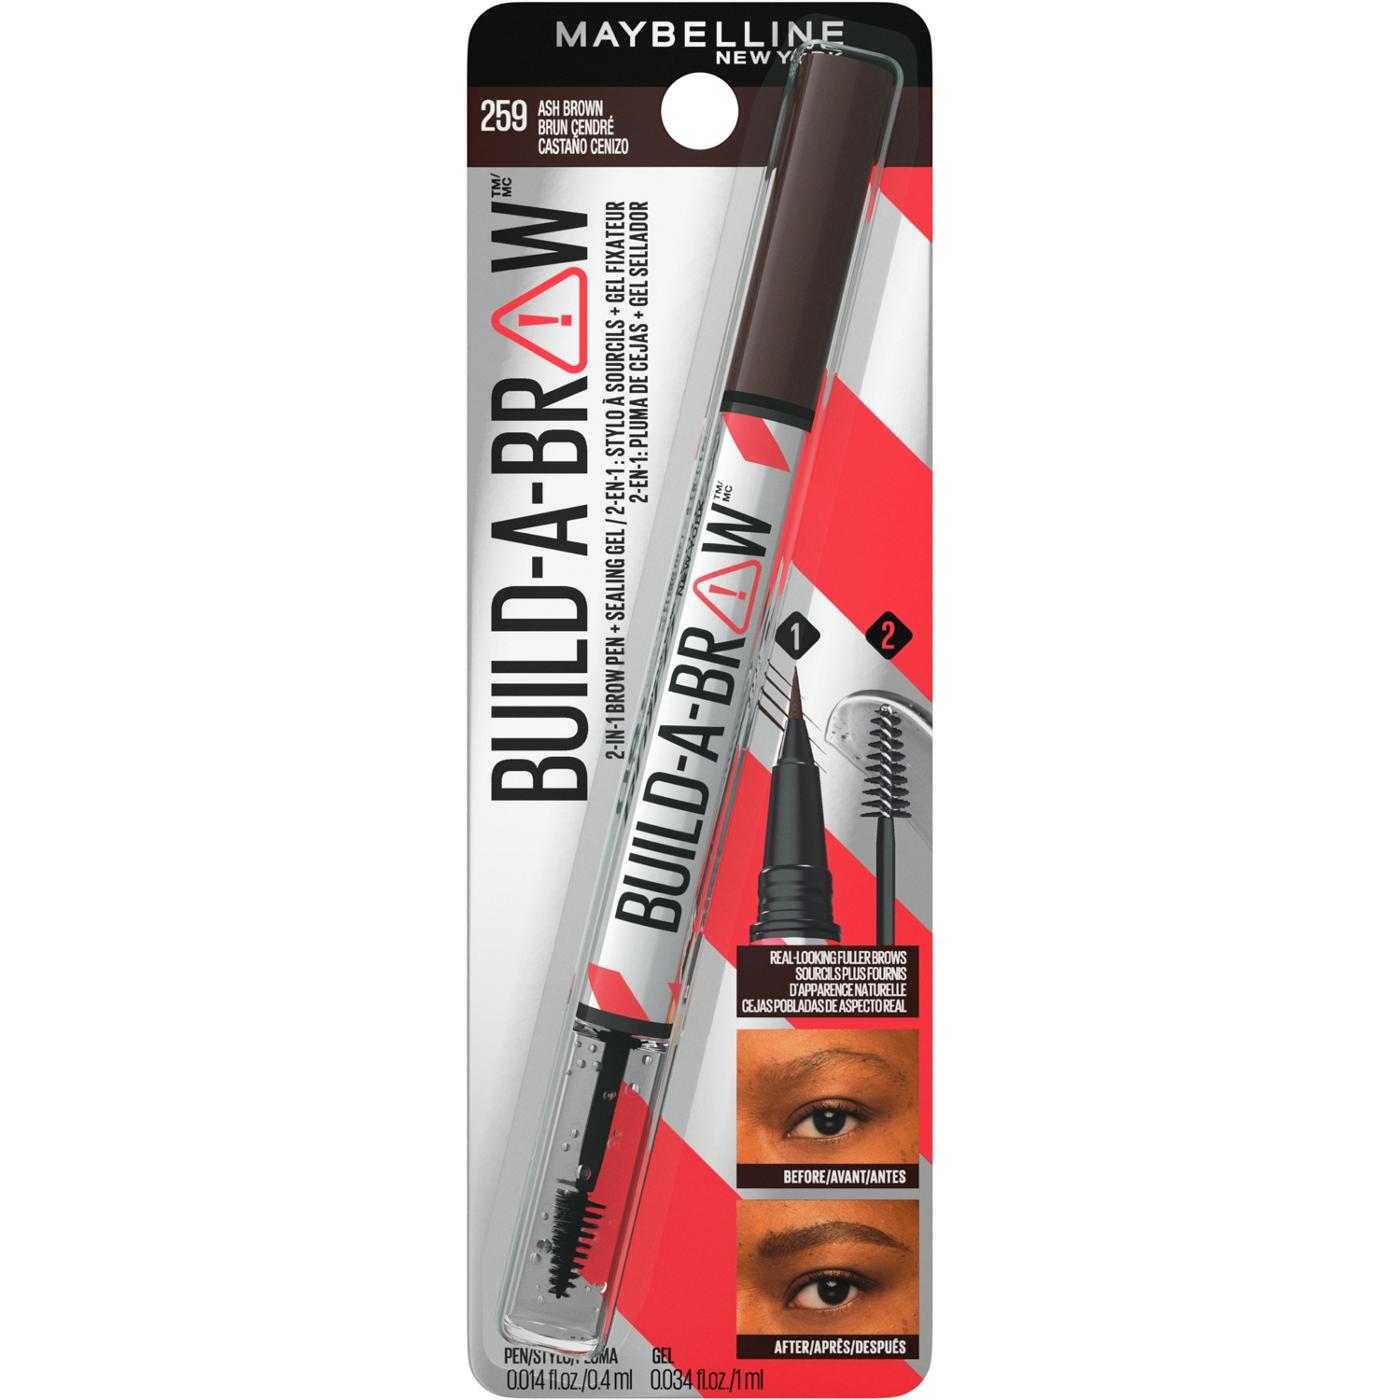 Maybelline Build A Brow 2 In 1 Brow Pen - Ash Brown; image 13 of 17